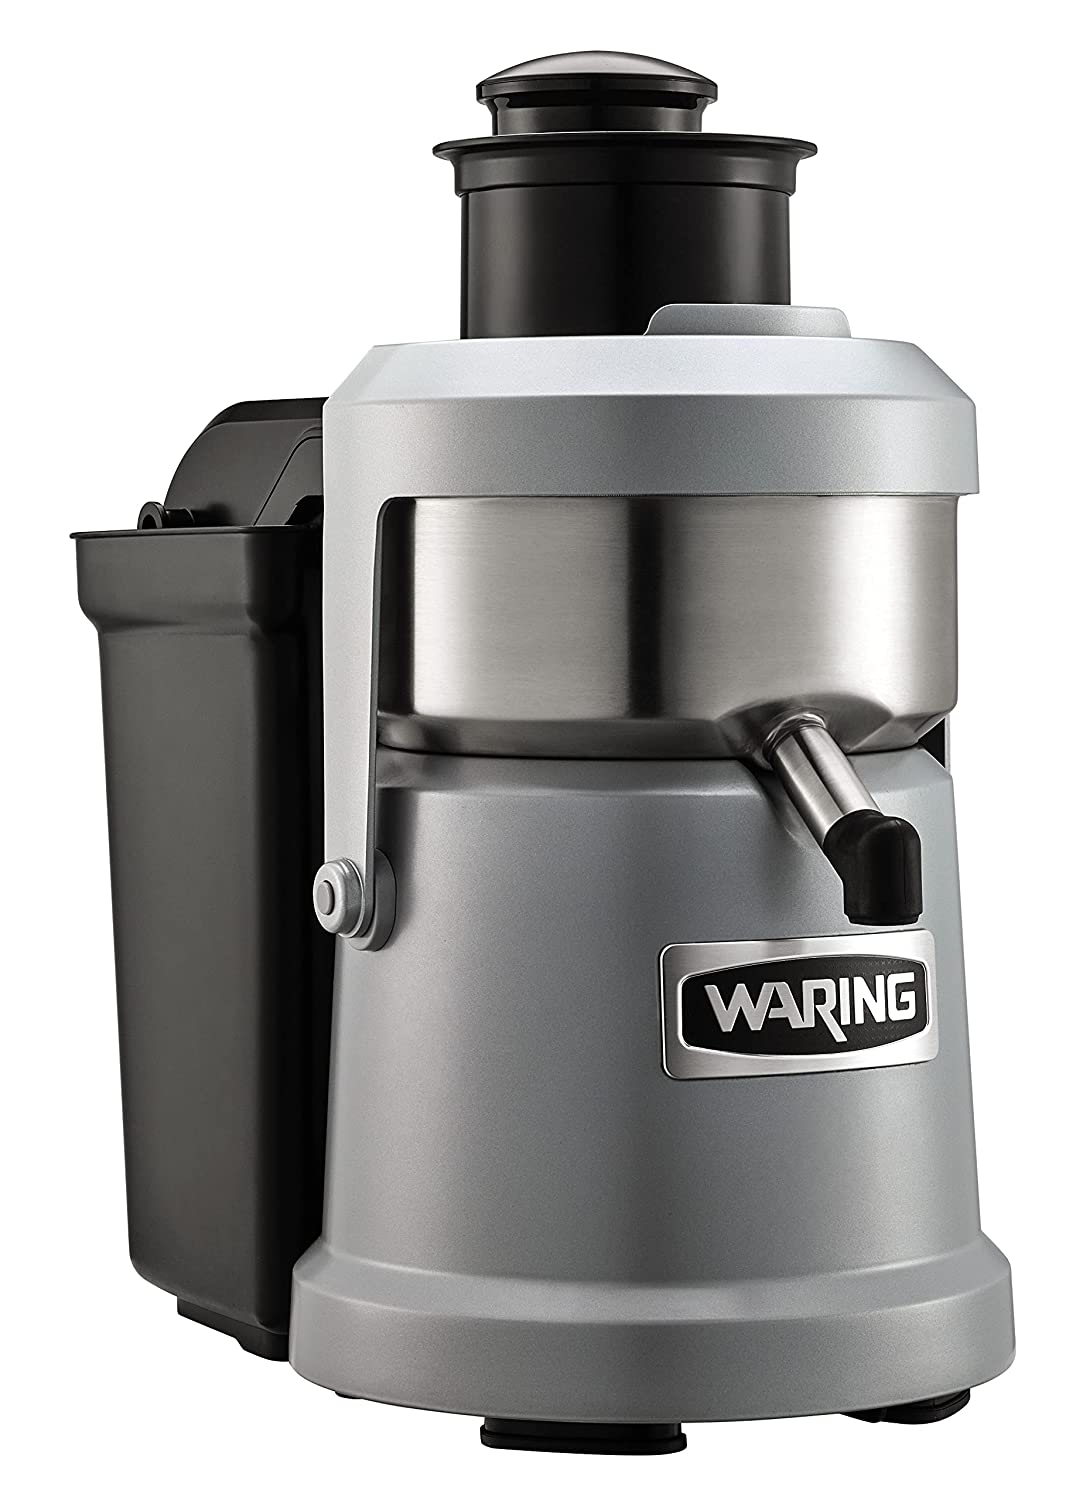 Waring Products WJX80 120V 1.2HP HD Pulp Eject Juice Extractor Import To Shop ×Product customization General Description